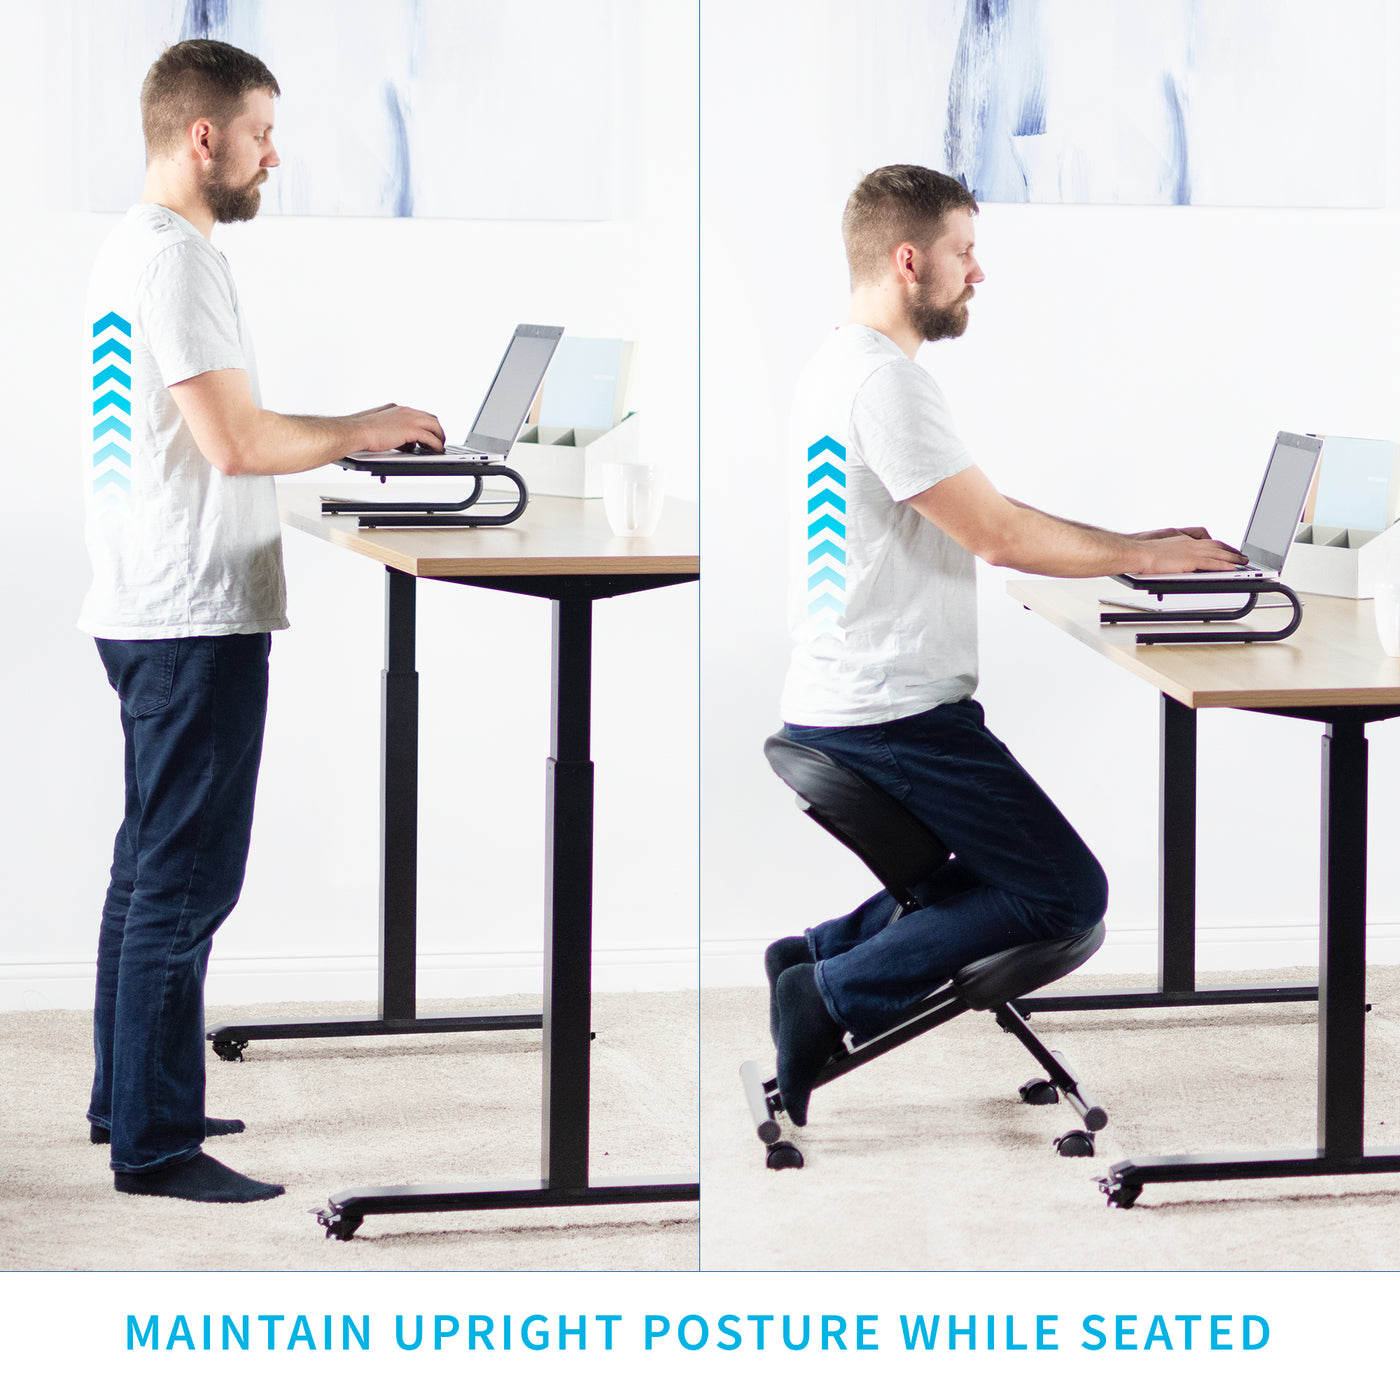 Maintain an upright standing posture while sitting in this ergonomic chair.